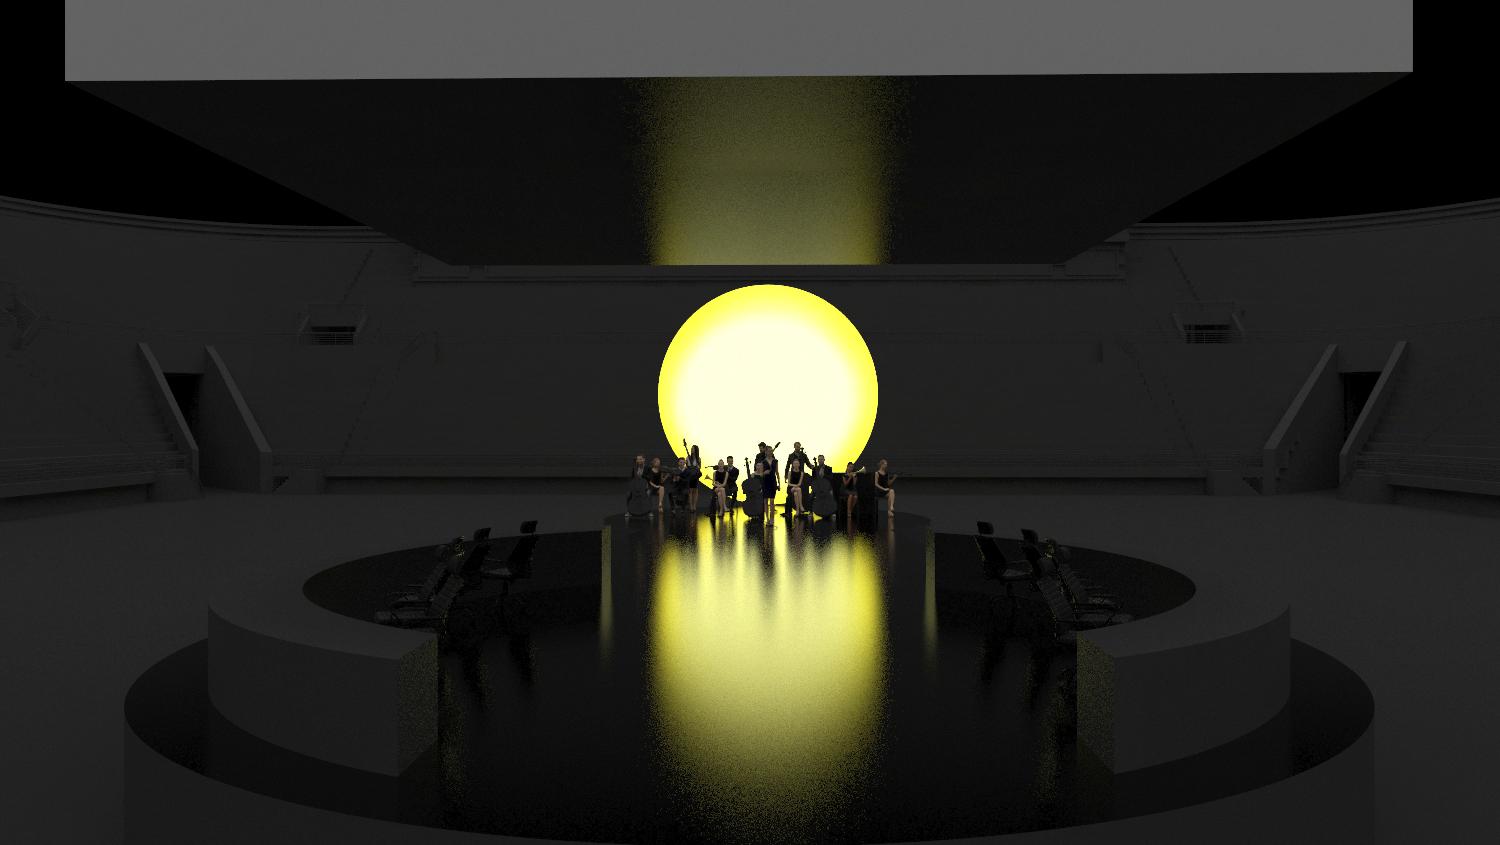 A 3D mockup of the sun in yellow.